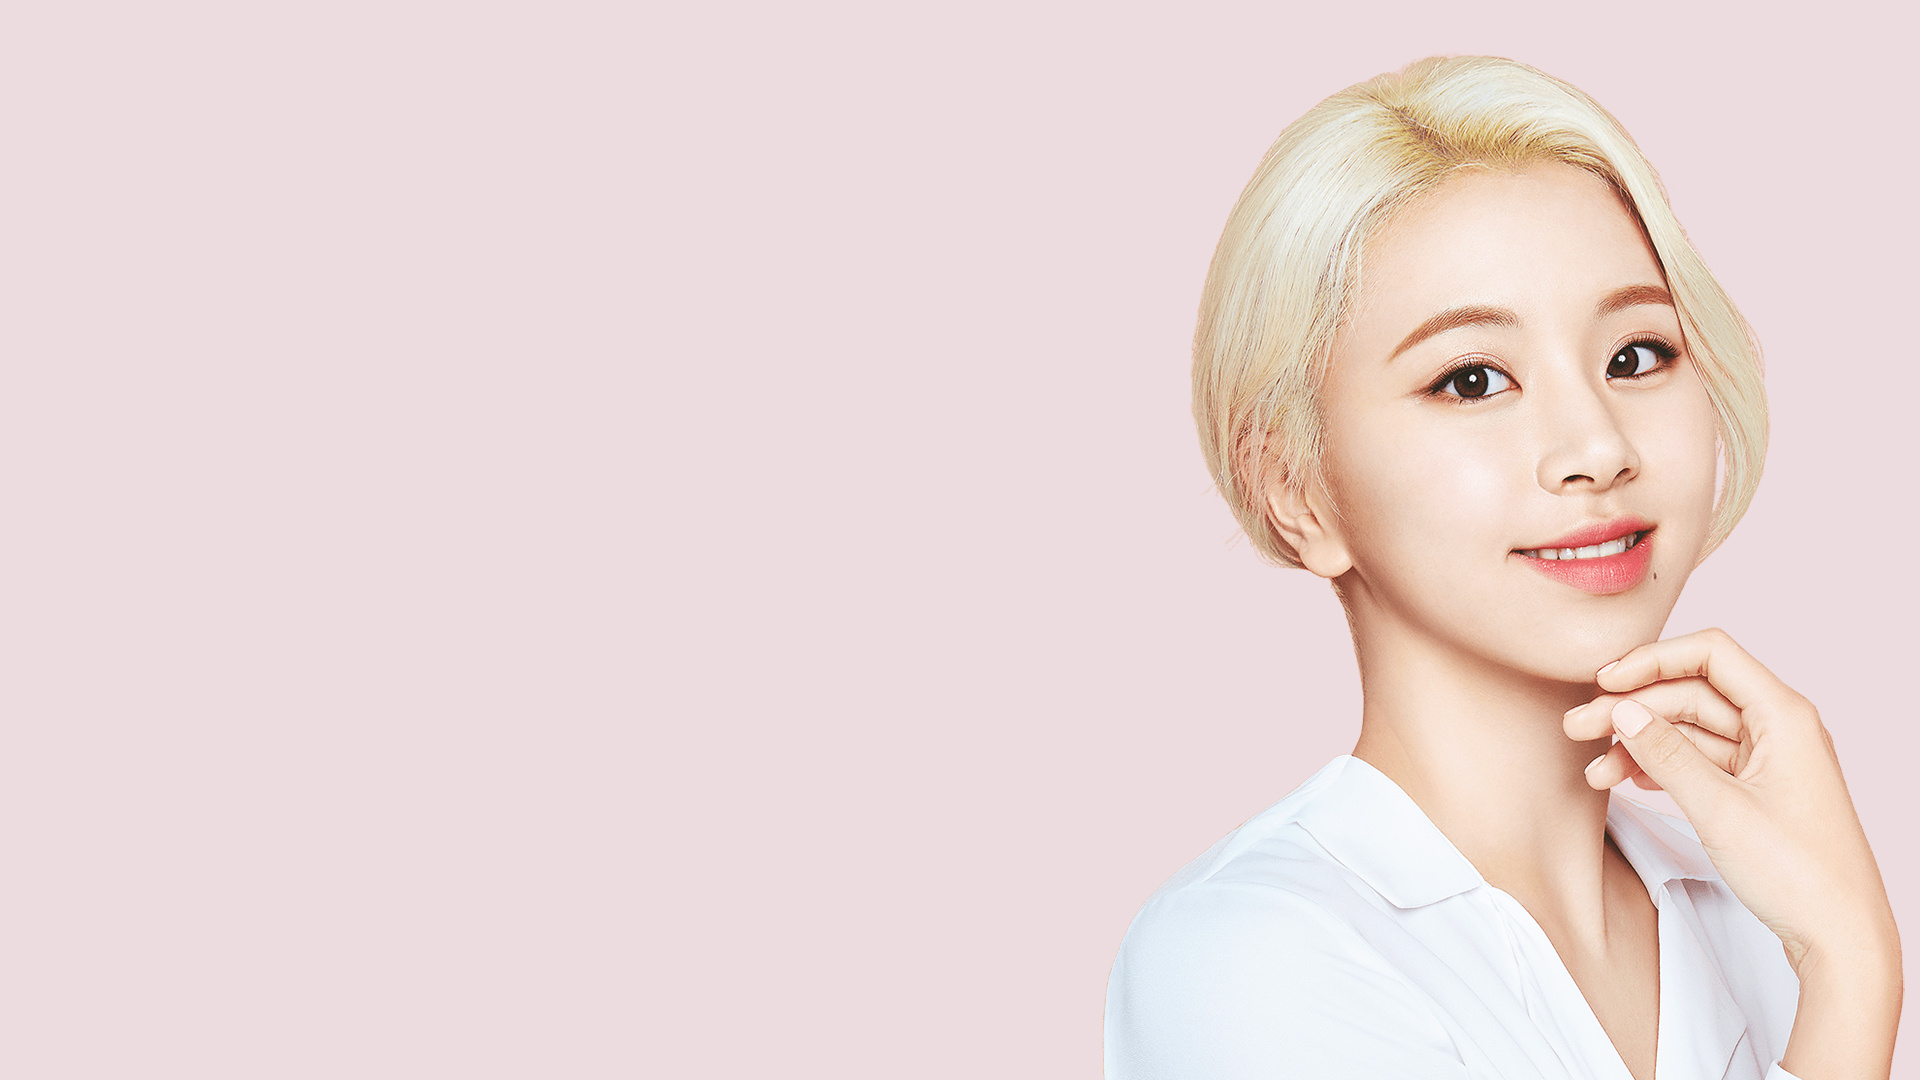 Chaeyoung in TWICE, Acuvue wallpapers, Lockscreen PC wallpapers, 1920x1080 Full HD Desktop